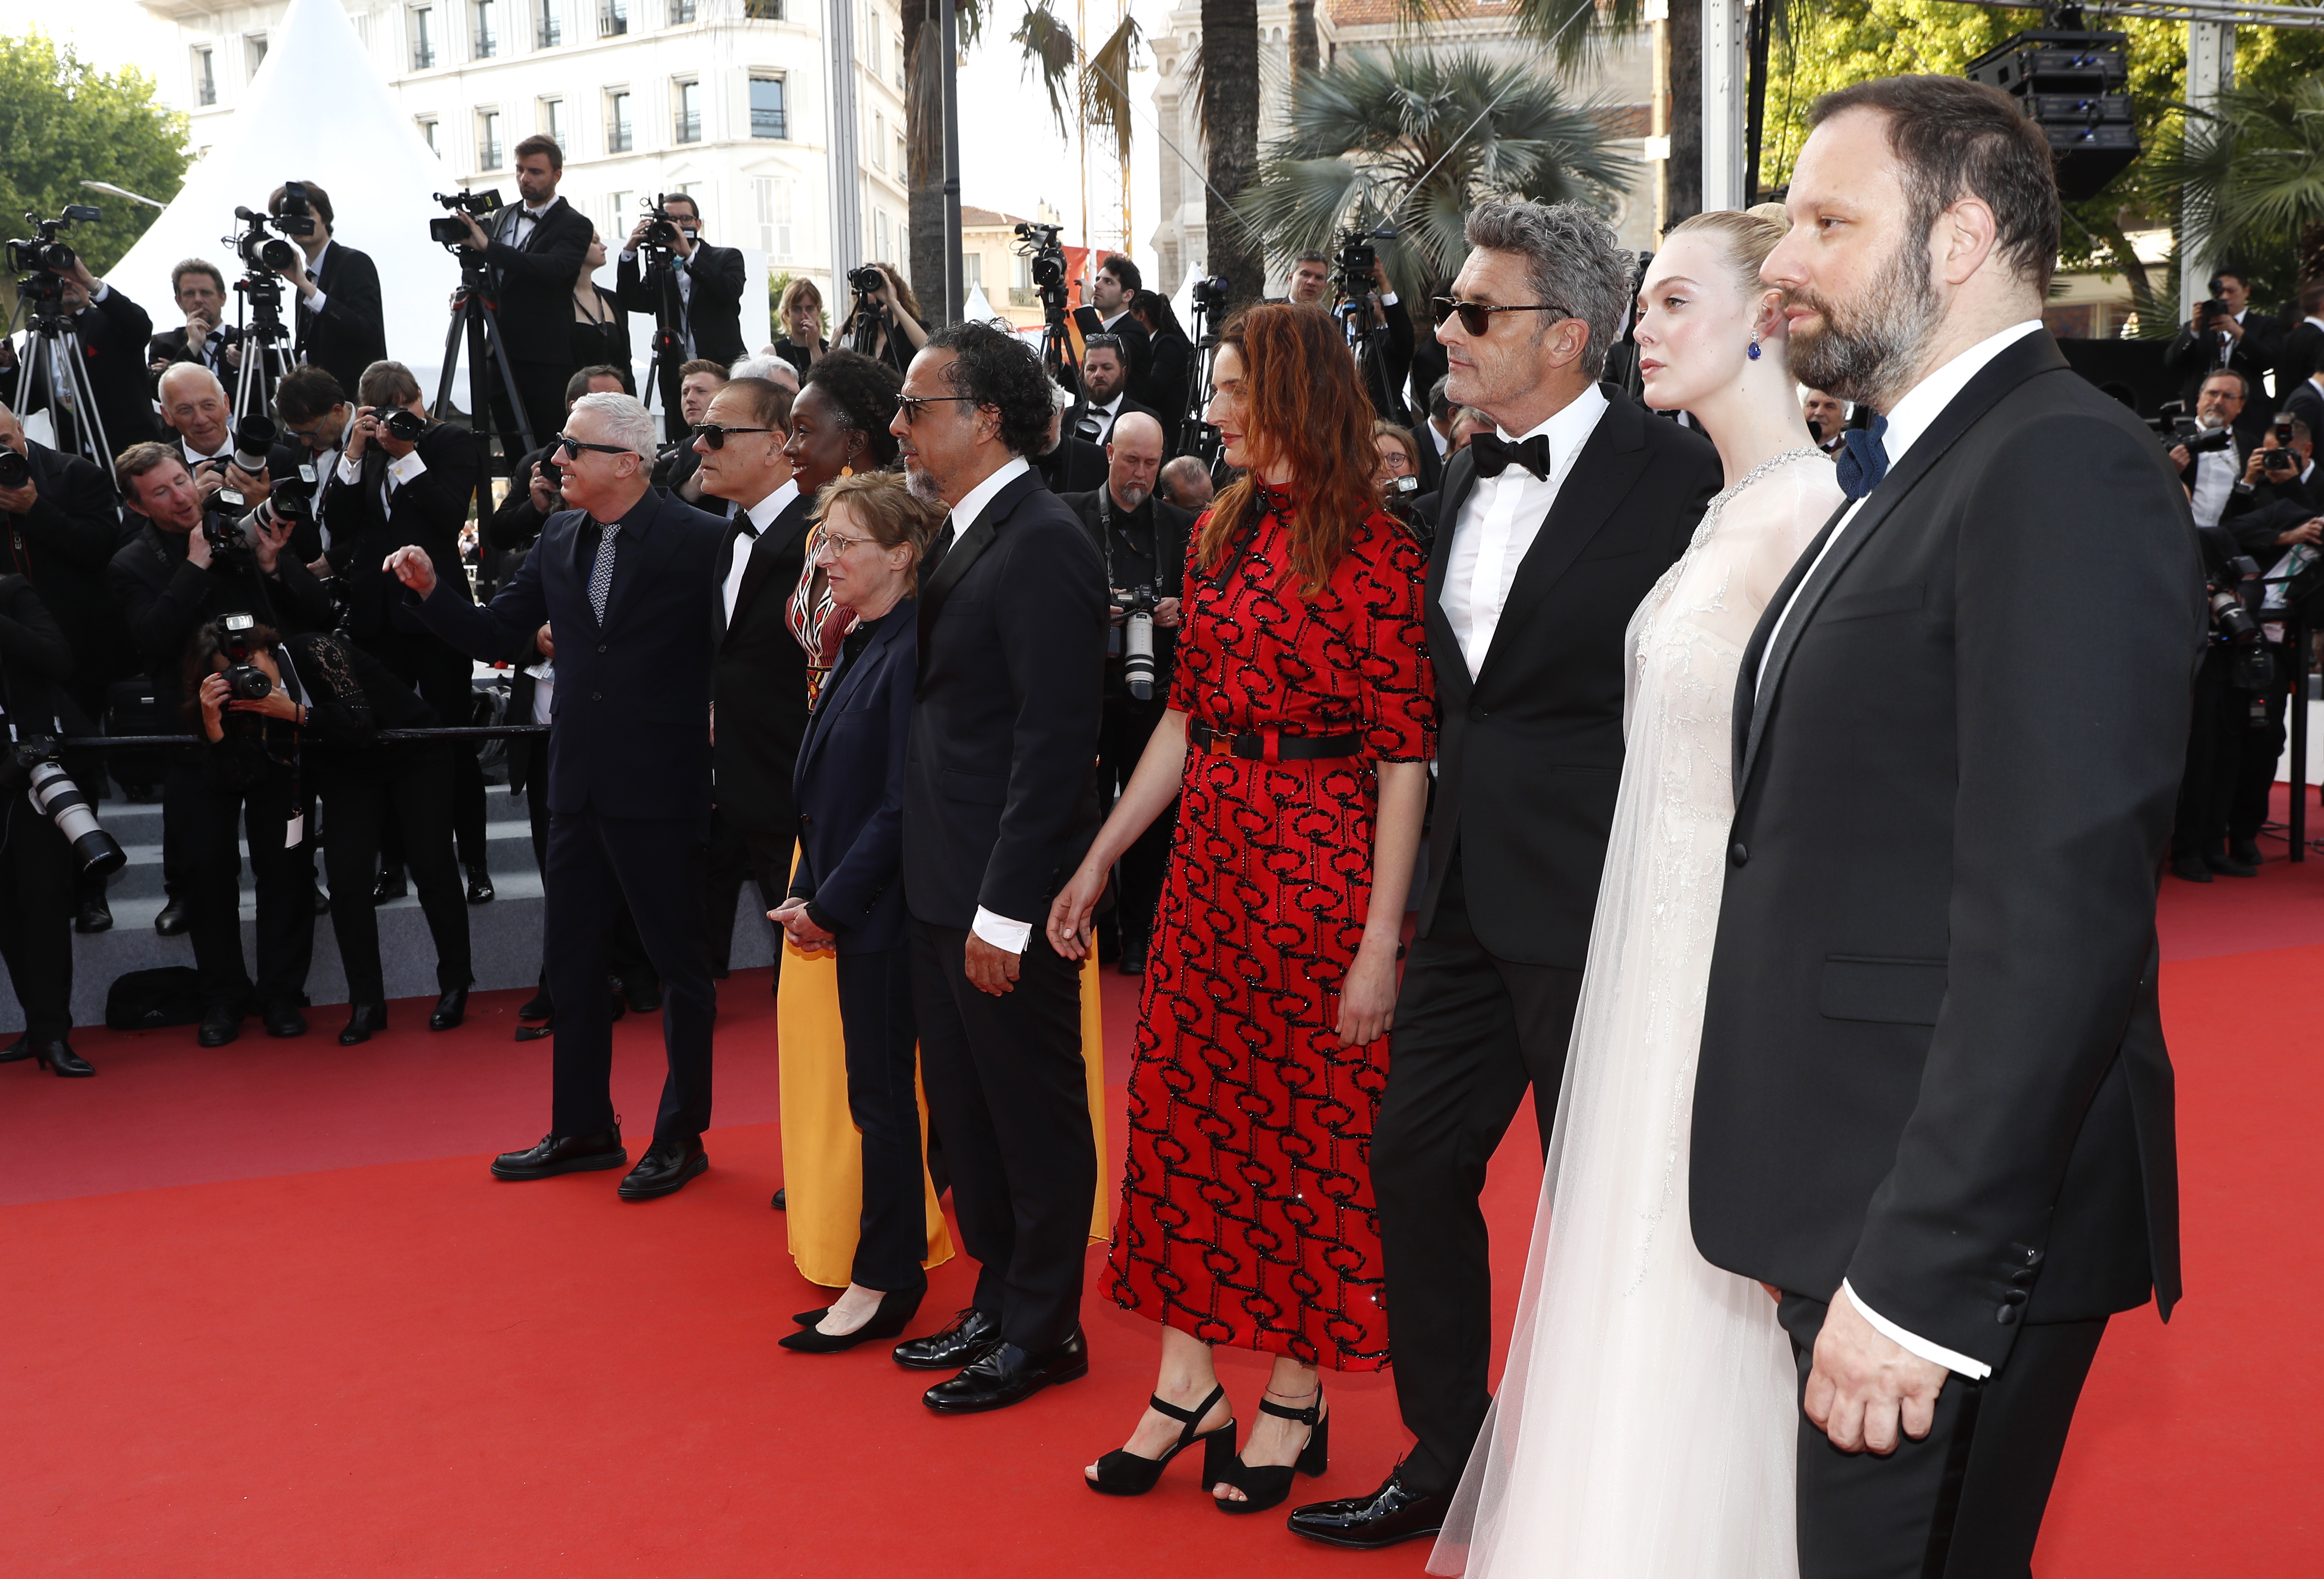 epa07600043 (L-R) Jury members, Robin Campillo, Enki Bilal, Maimouna N'Diaye, Kelly Reichardt, President of the Jury, Mexican director Alejandro Gonzalez Inarritu, Alice Rohrwacher, Pawel Pawlikowski, Elle Fanning, Yorgos Lanthimos arrive for the Closing Awards Ceremony of the 72nd annual Cannes Film Festival, in Cannes, France, 25 May 2019. The Golden Palm winning movie will be screened after the closing ceremony.  EPA/SEBASTIEN NOGIER